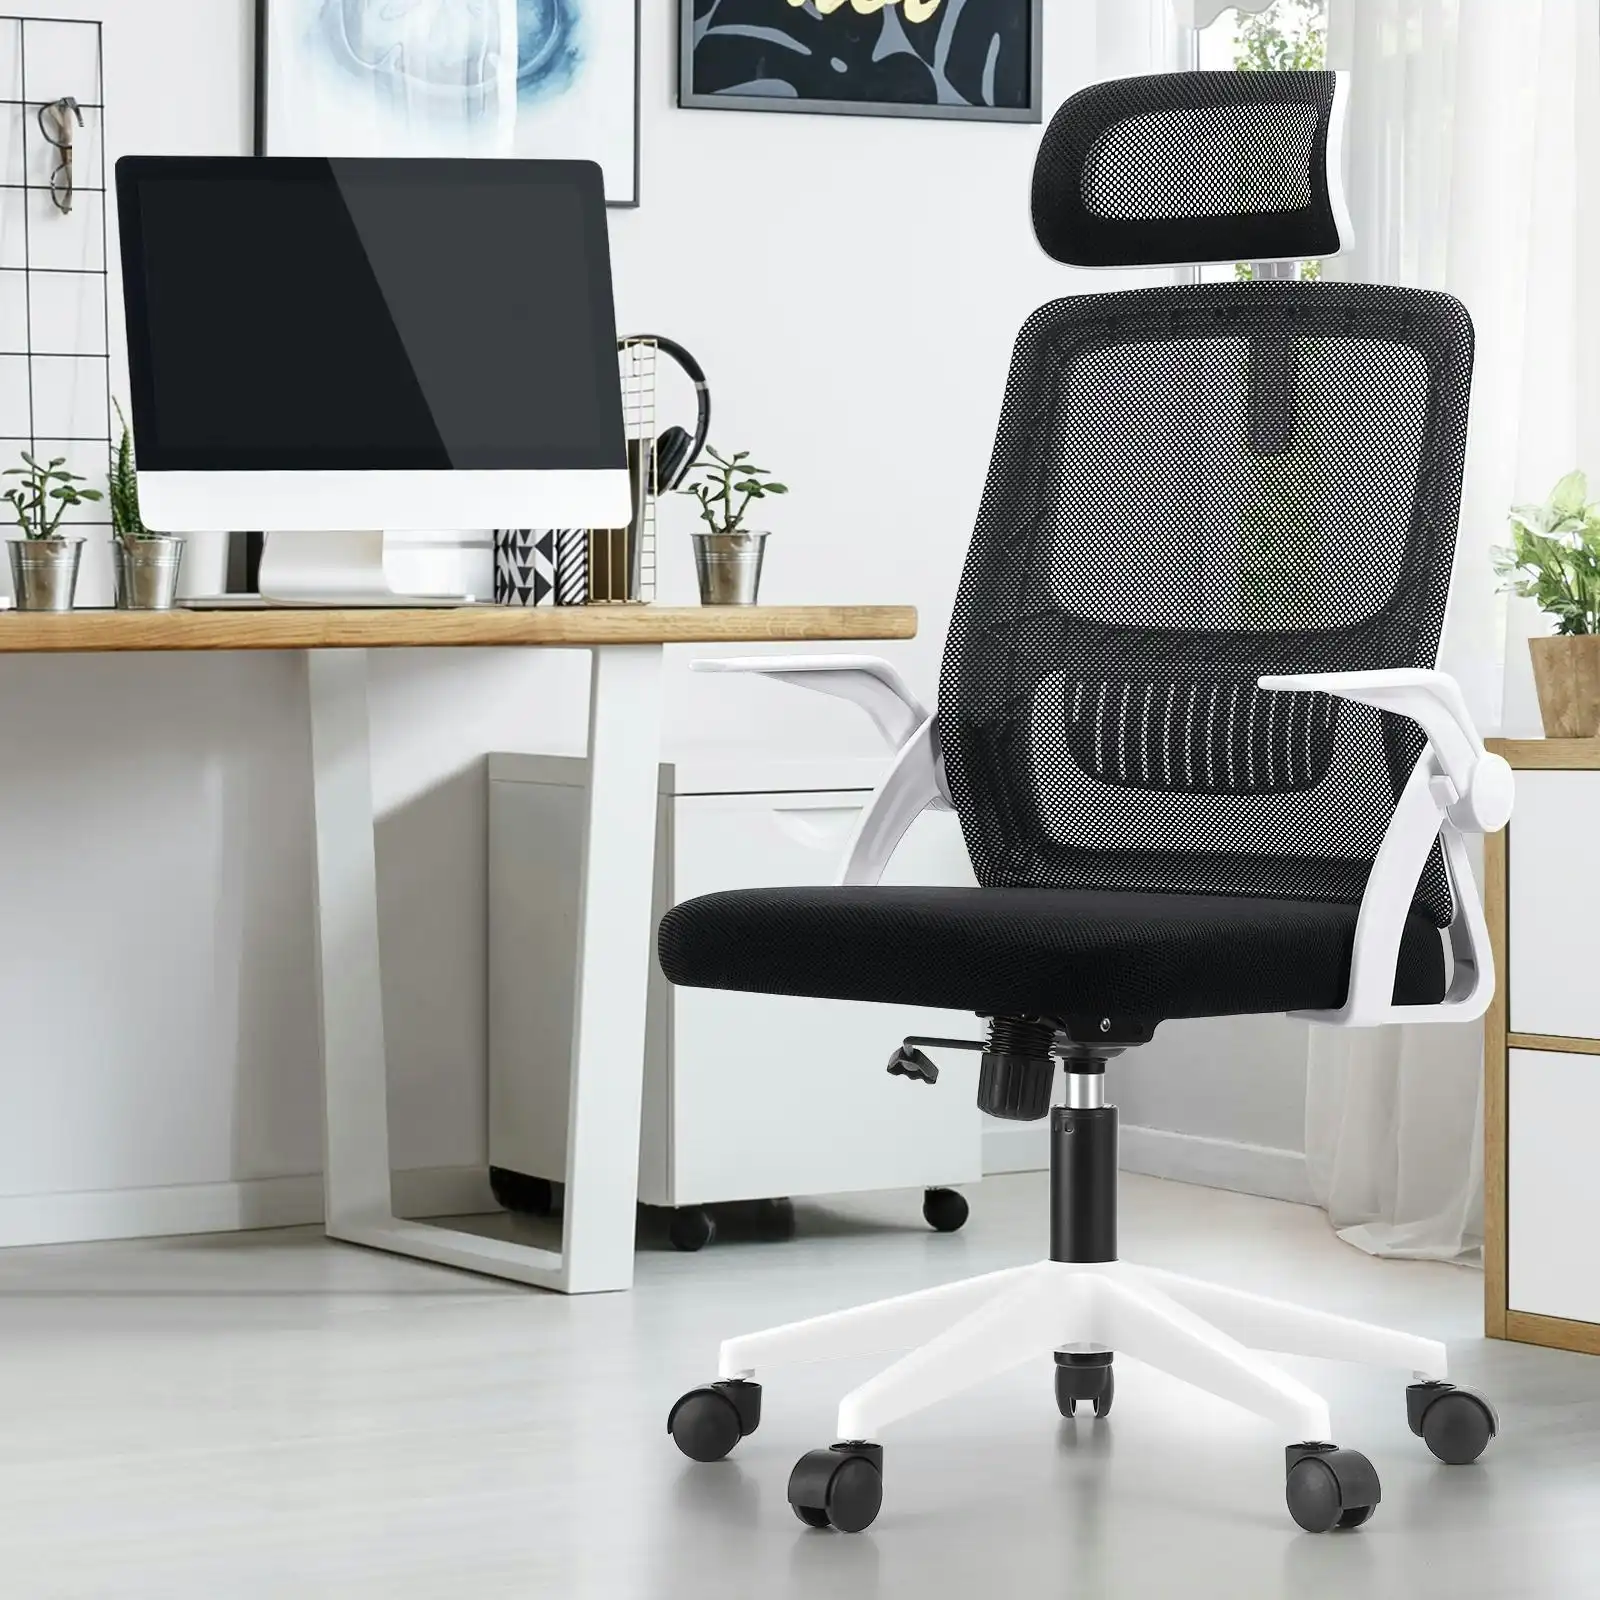 Oikiture Mesh Office Chair Executive Fabric Gaming Seat Racing Computer 1 White&Black